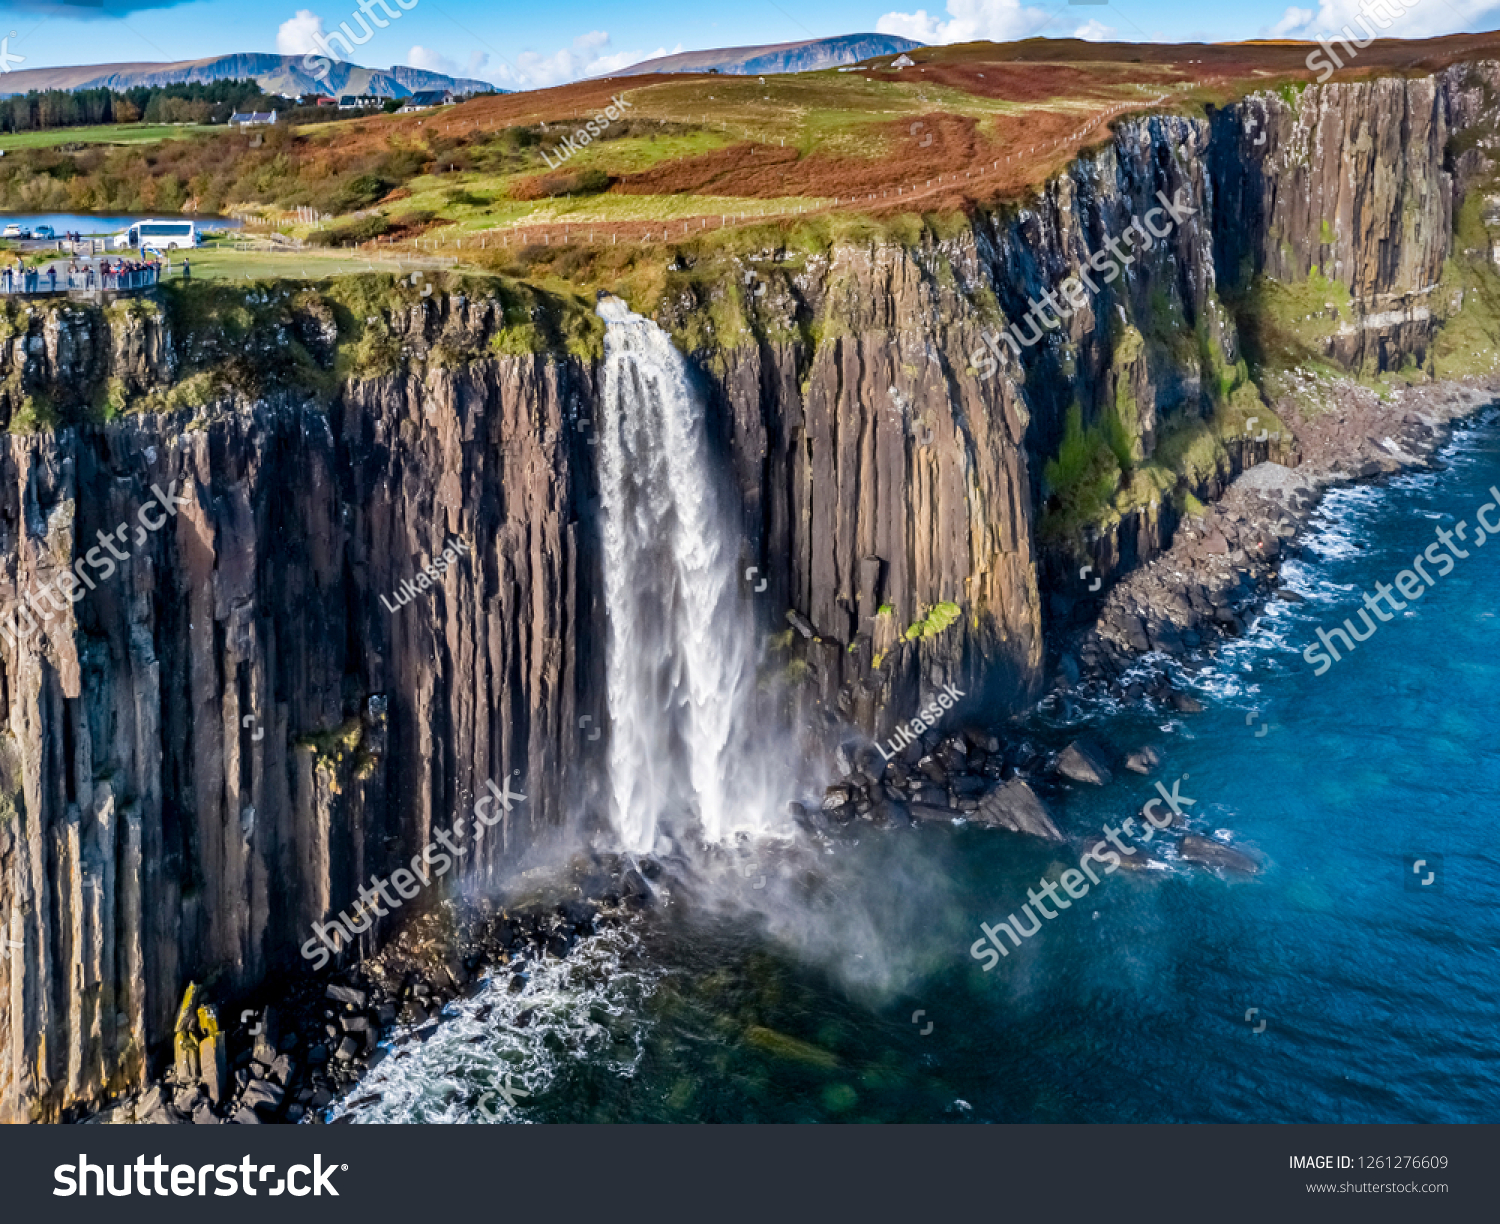 Aerial view of the dramatic coastline at the cliffs by Staffin with the famous Kilt Rock waterfall - Isle of Skye - Scotland. #1261276609